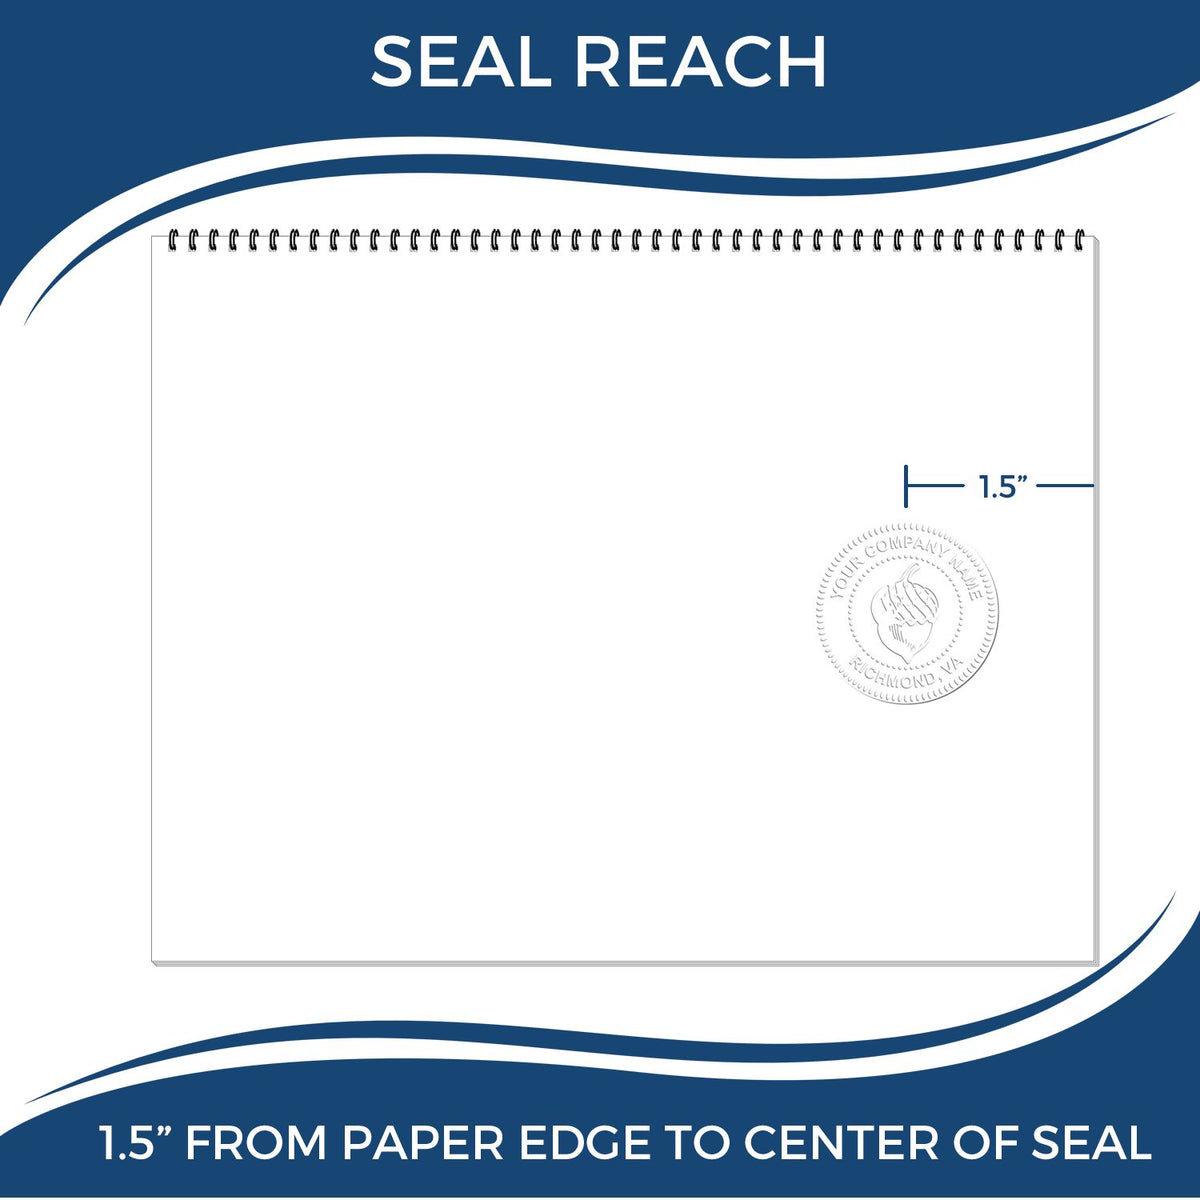 An infographic showing the seal reach which is represented by a ruler and a miniature seal image of the Gift Alabama Land Surveyor Seal